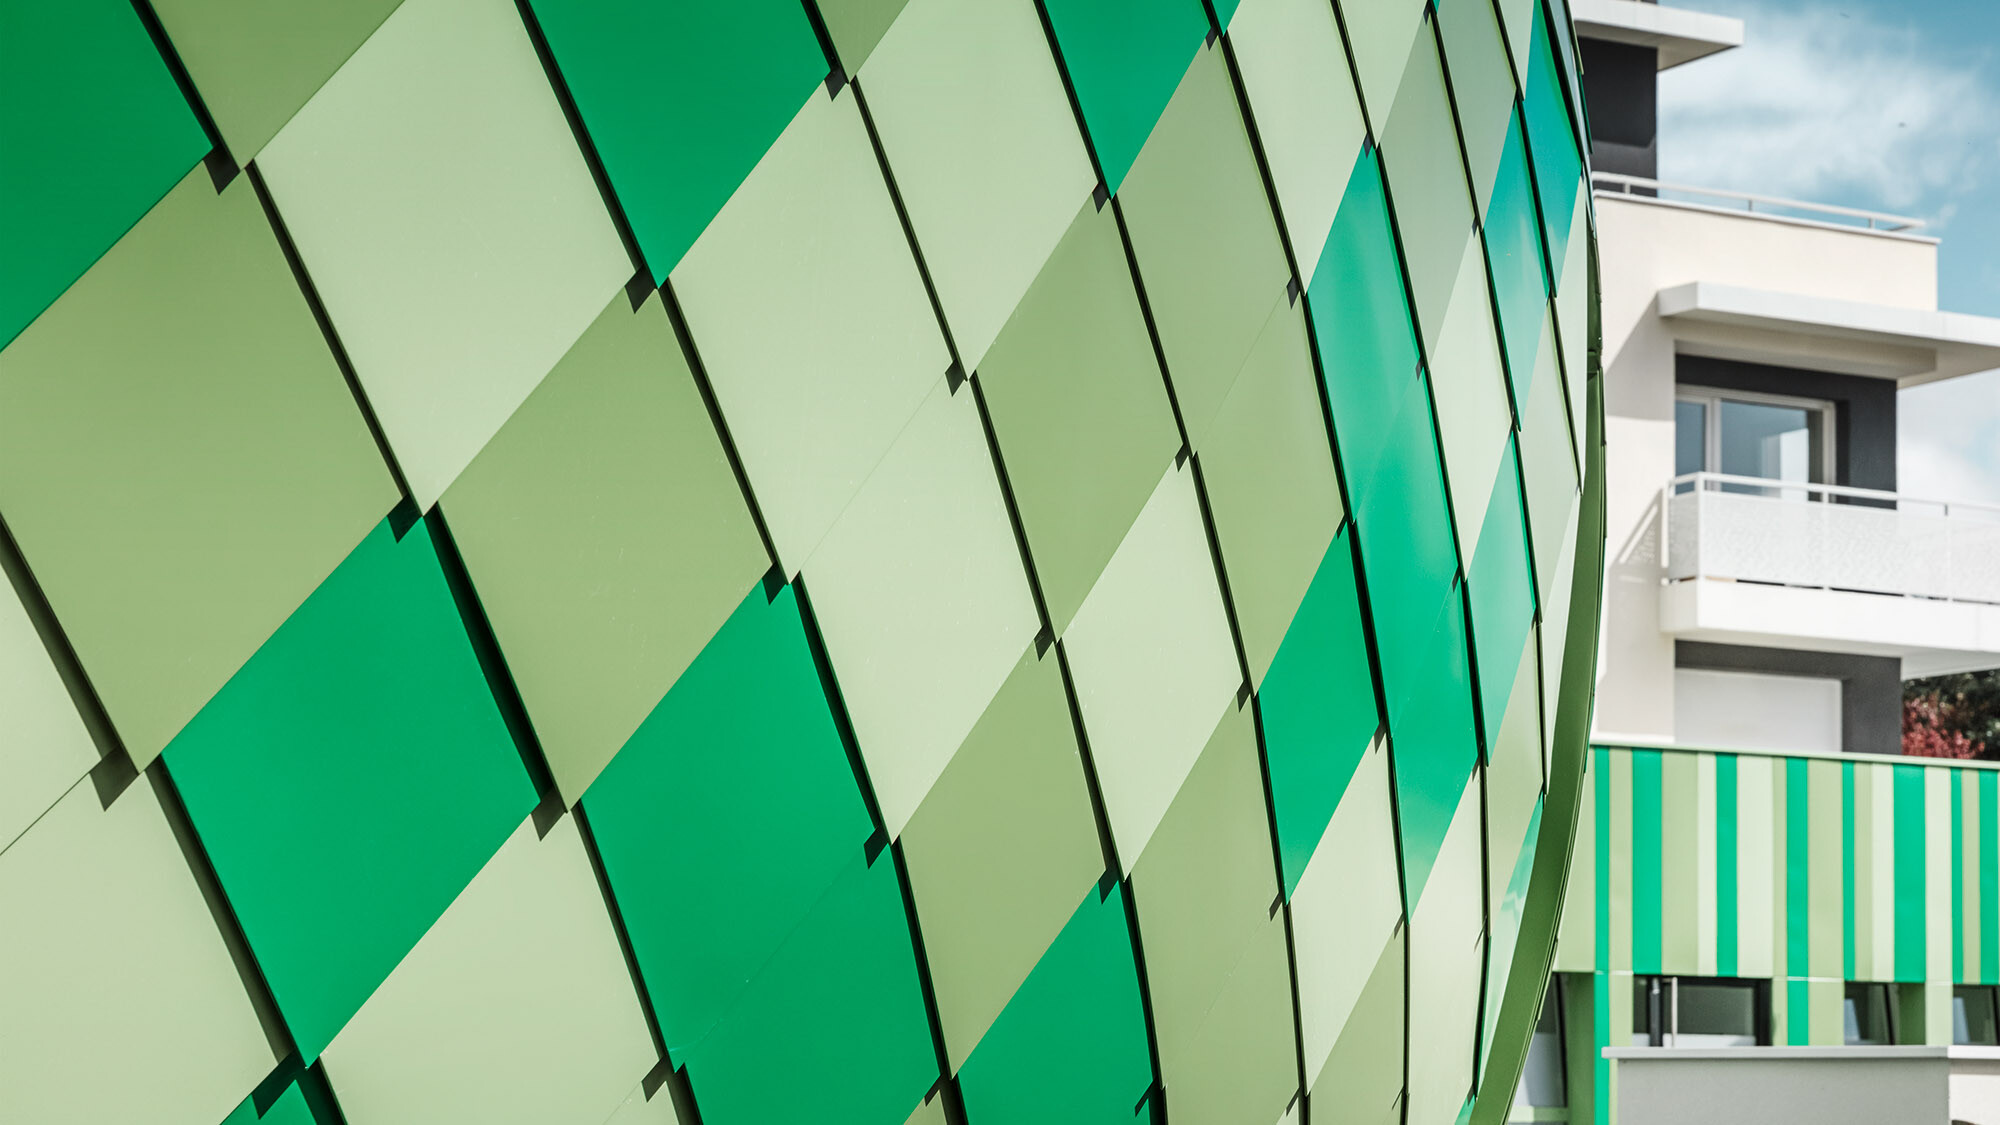 Close-up of the aluminium cladding made of rhomboid tiles in the bespoke colours grey-green, reseda green and mint green from the side. 